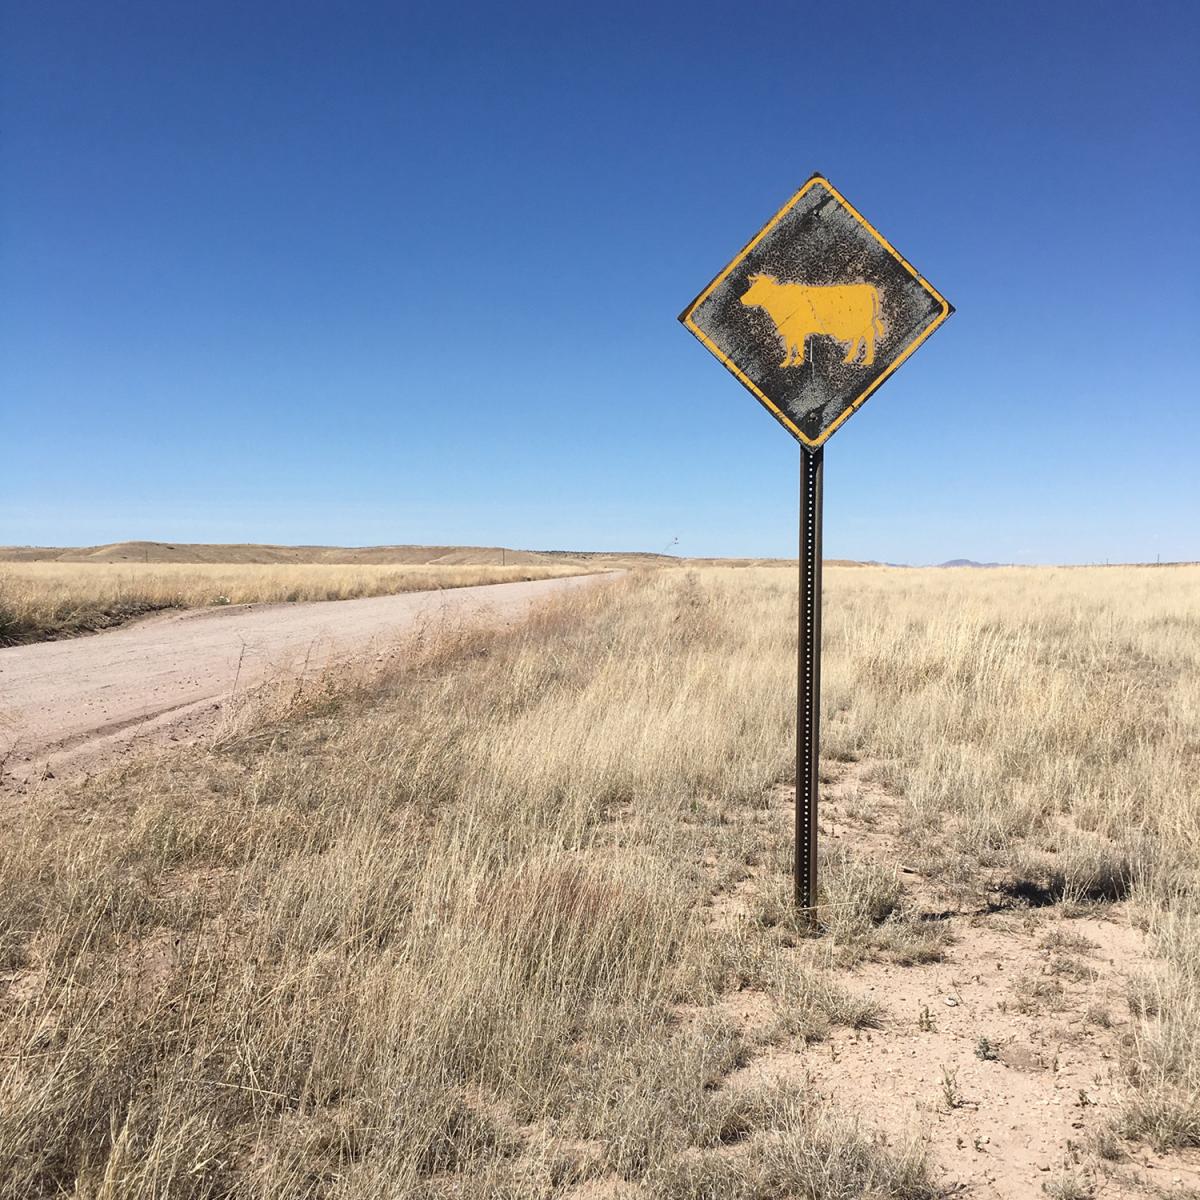 A cattle crossing sign